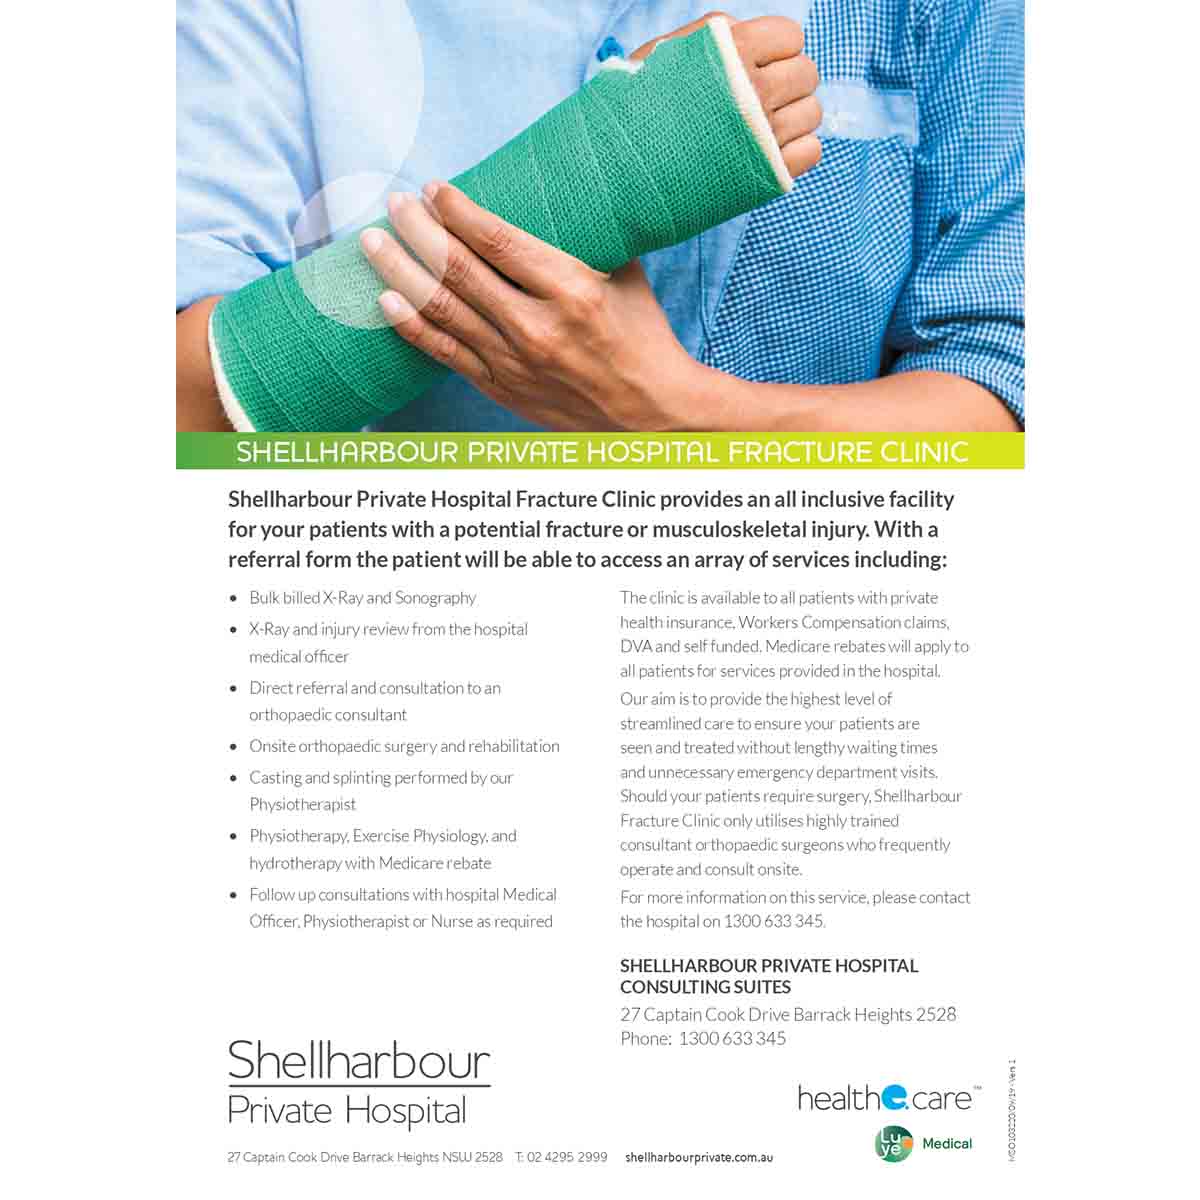 Shellharbour private fracture clinic